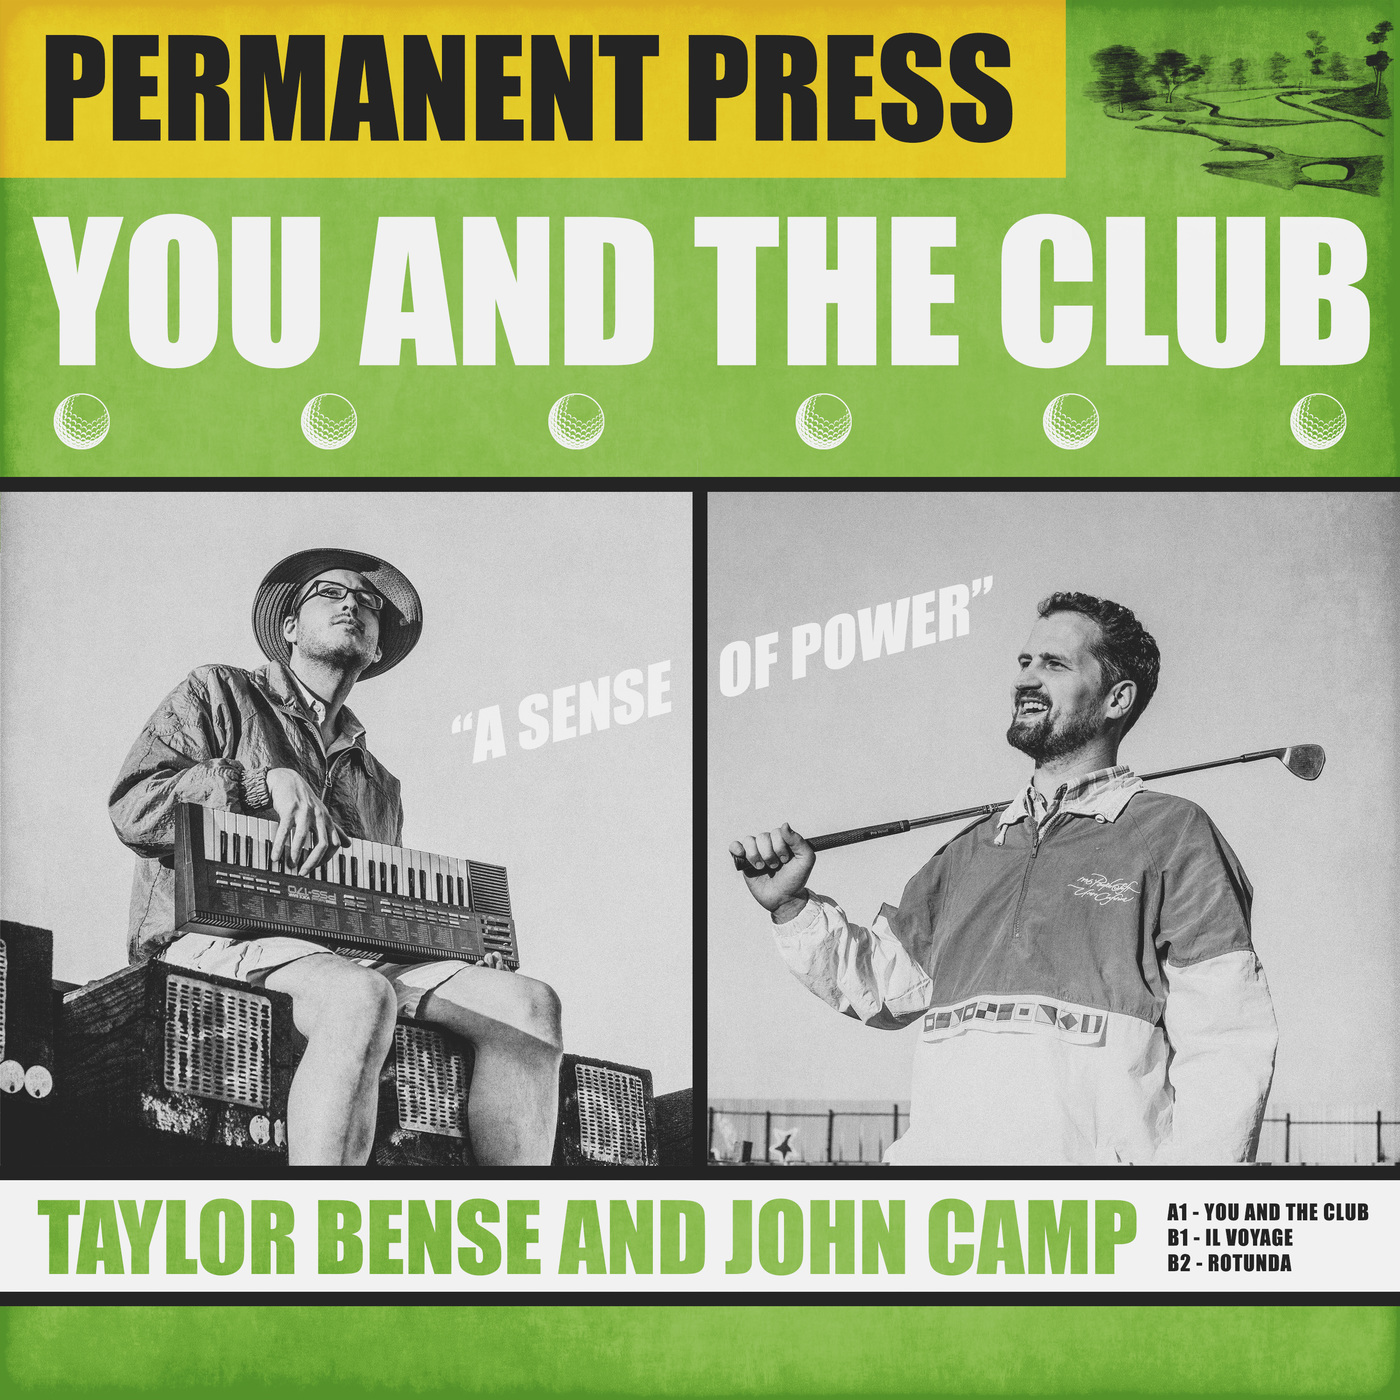 Permanent Press - You and the Club / TRAFFIC CONTROL